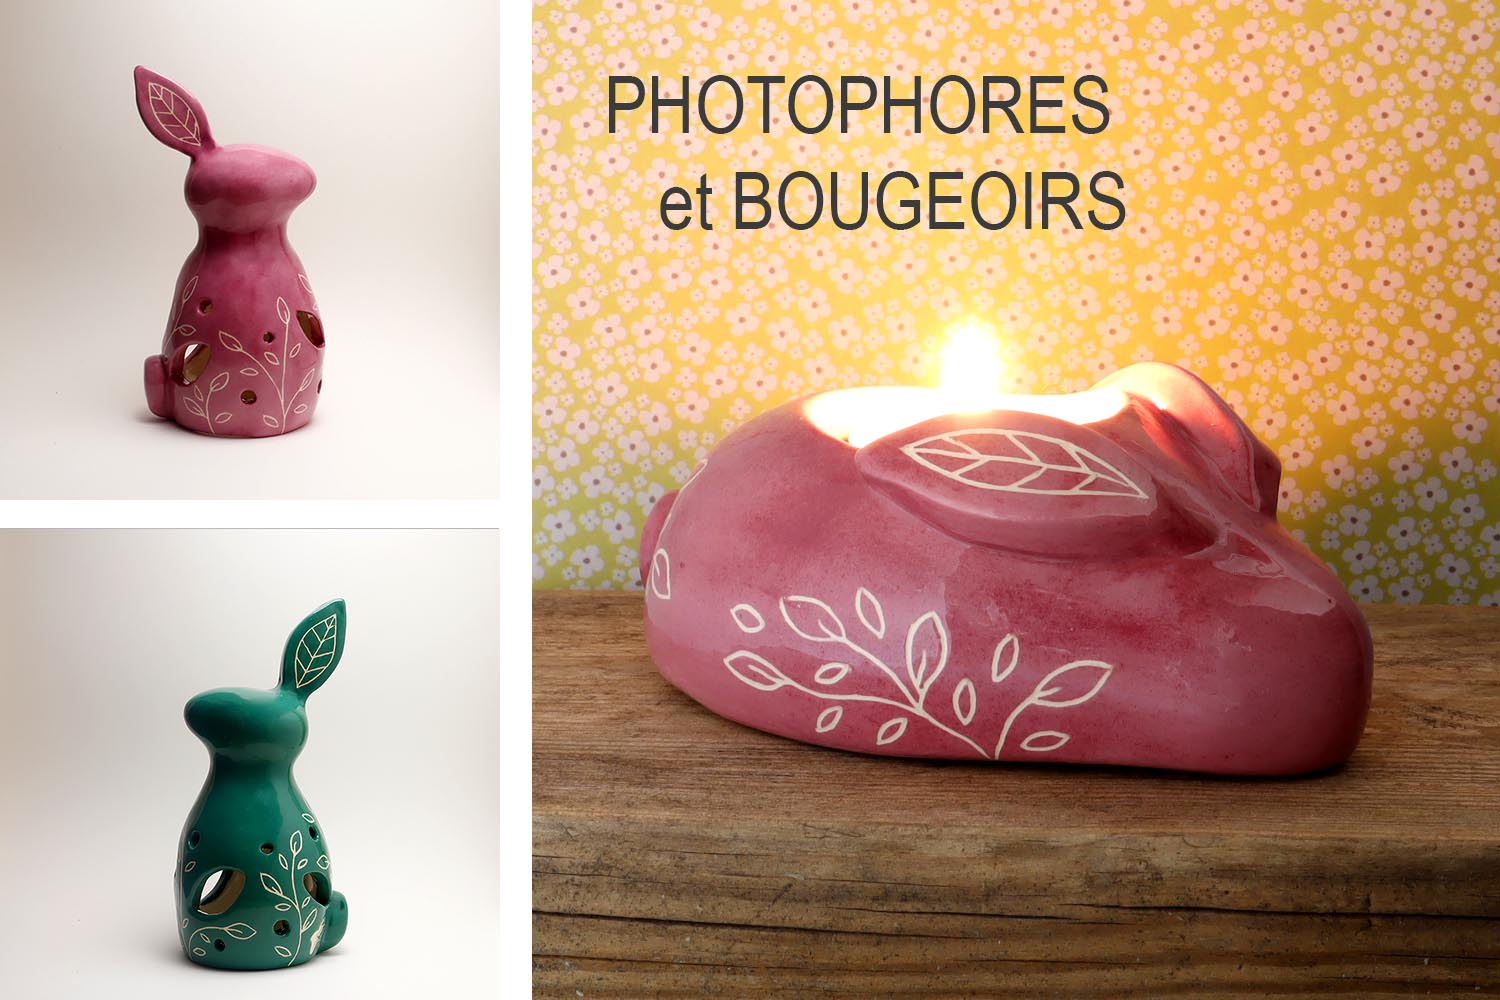 Photophores et bougeoirs